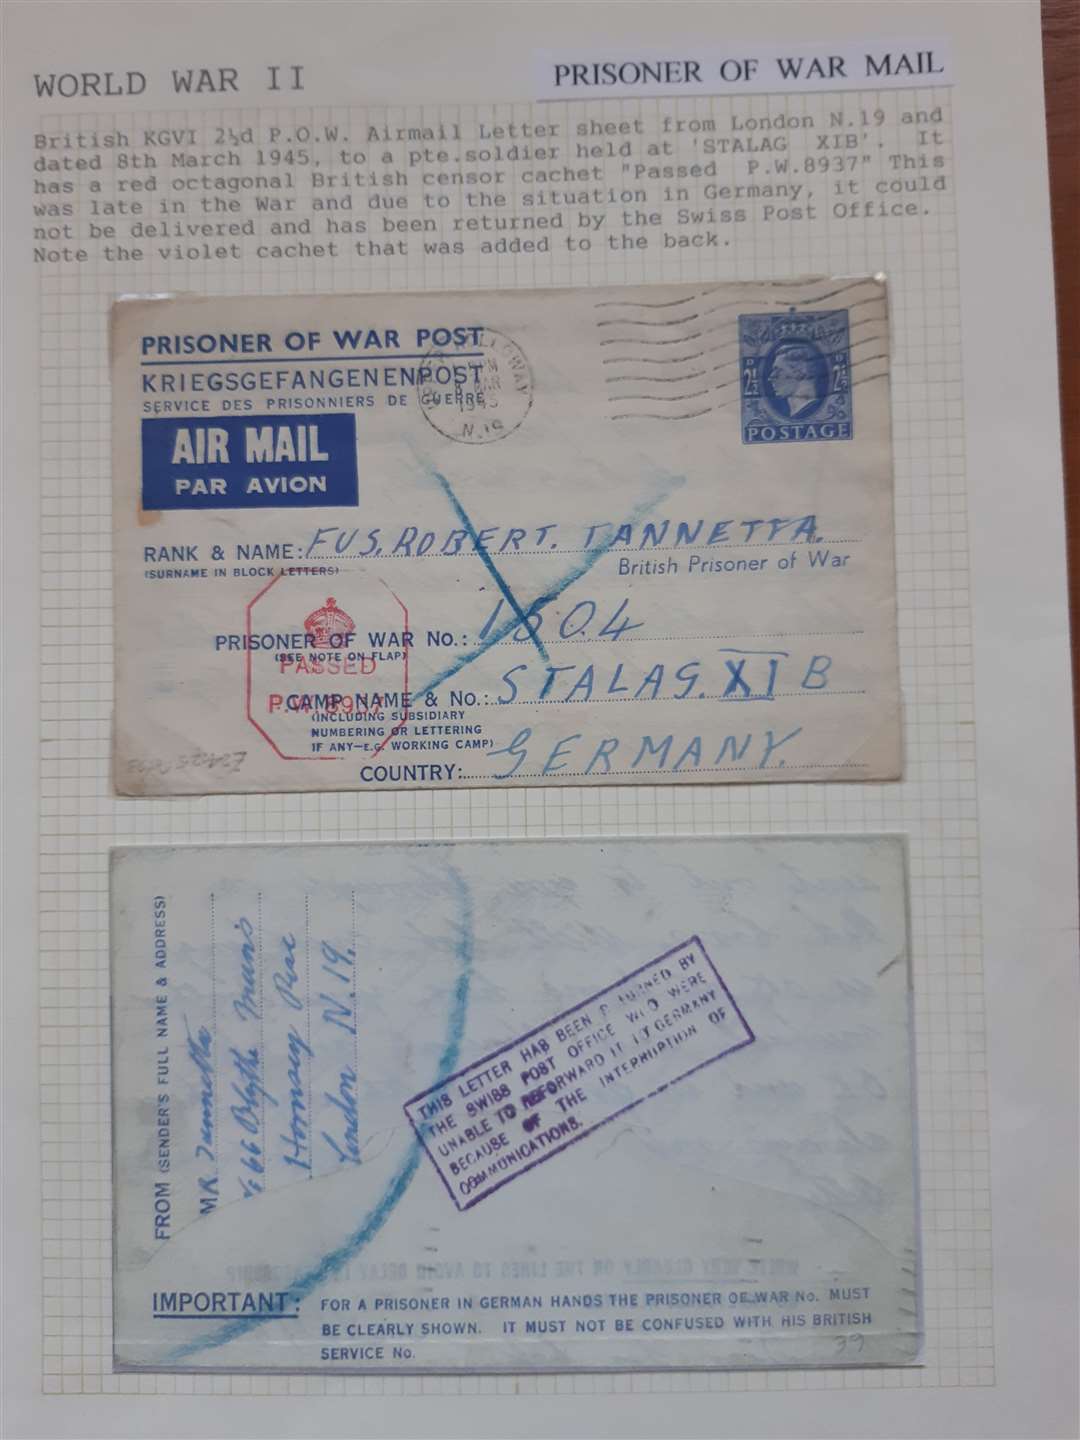 Airmail letter to a British PoW Robert Tannetta at Stalag XIB from the Second World War (58631173)